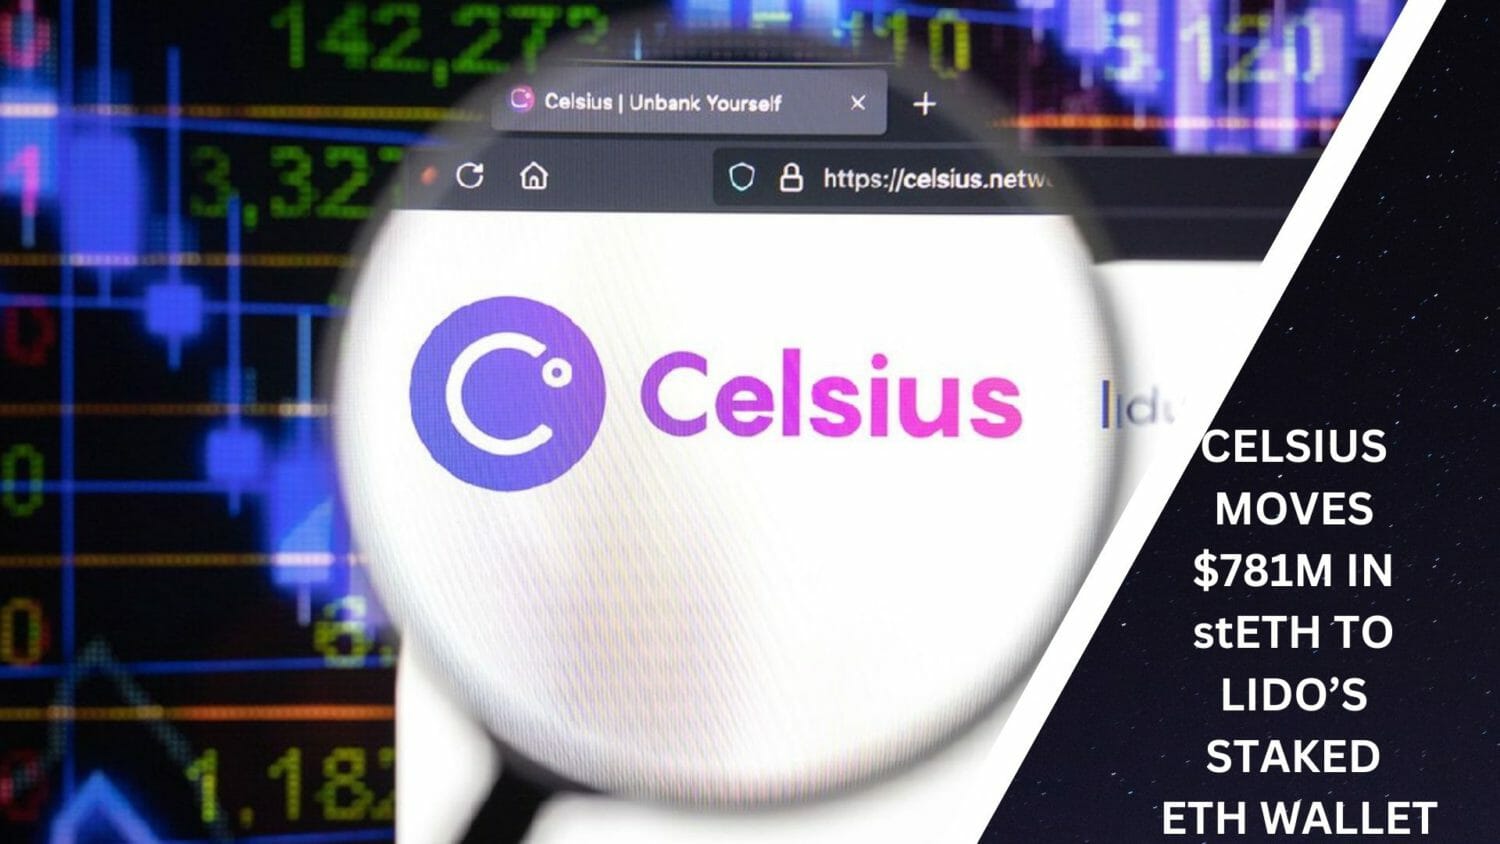 Celsius Moves $781M In Steth To Lido’s Staked Eth Wallet